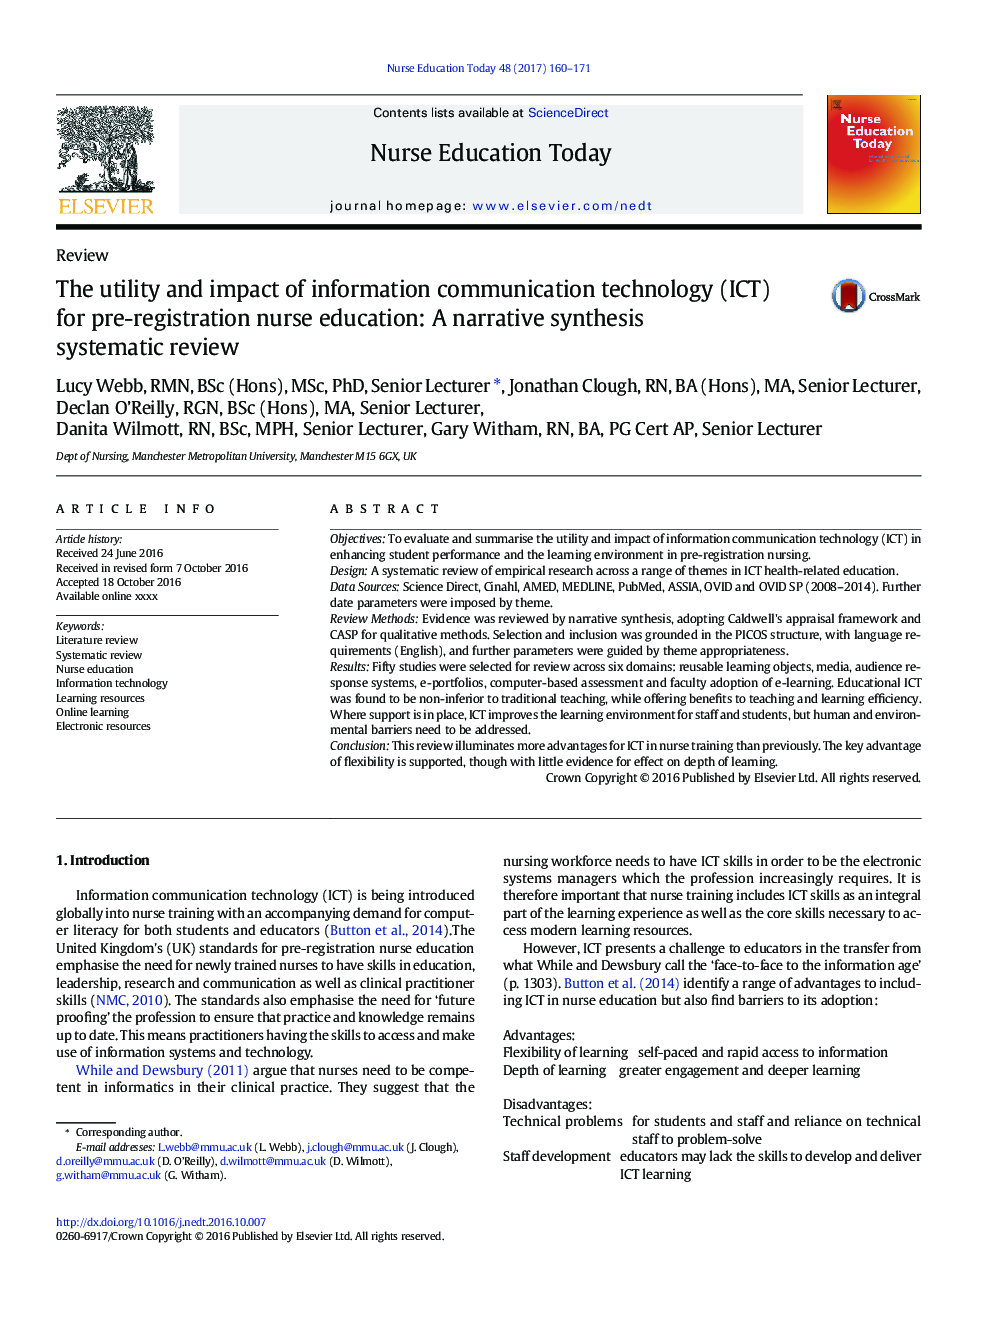 The utility and impact of information communication technology (ICT) for pre-registration nurse education: A narrative synthesis systematic review